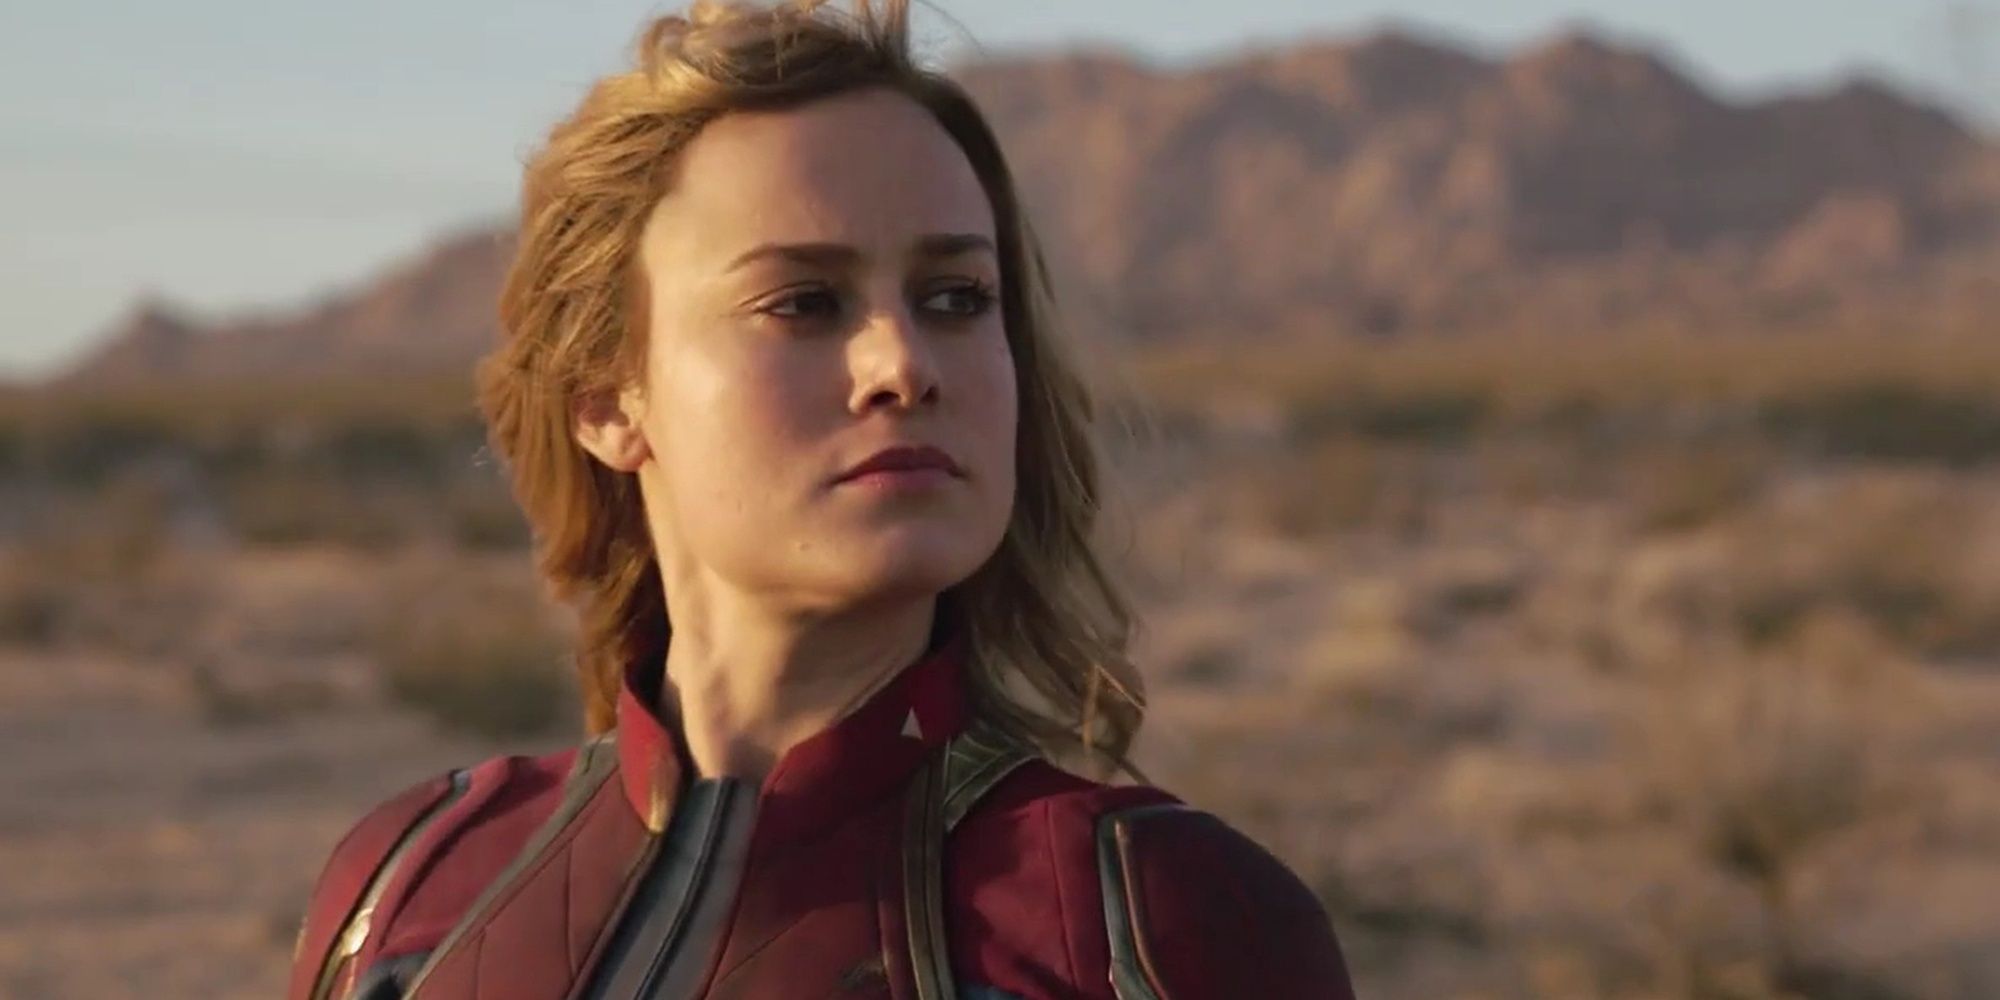 Captain Marvel staring into the distance